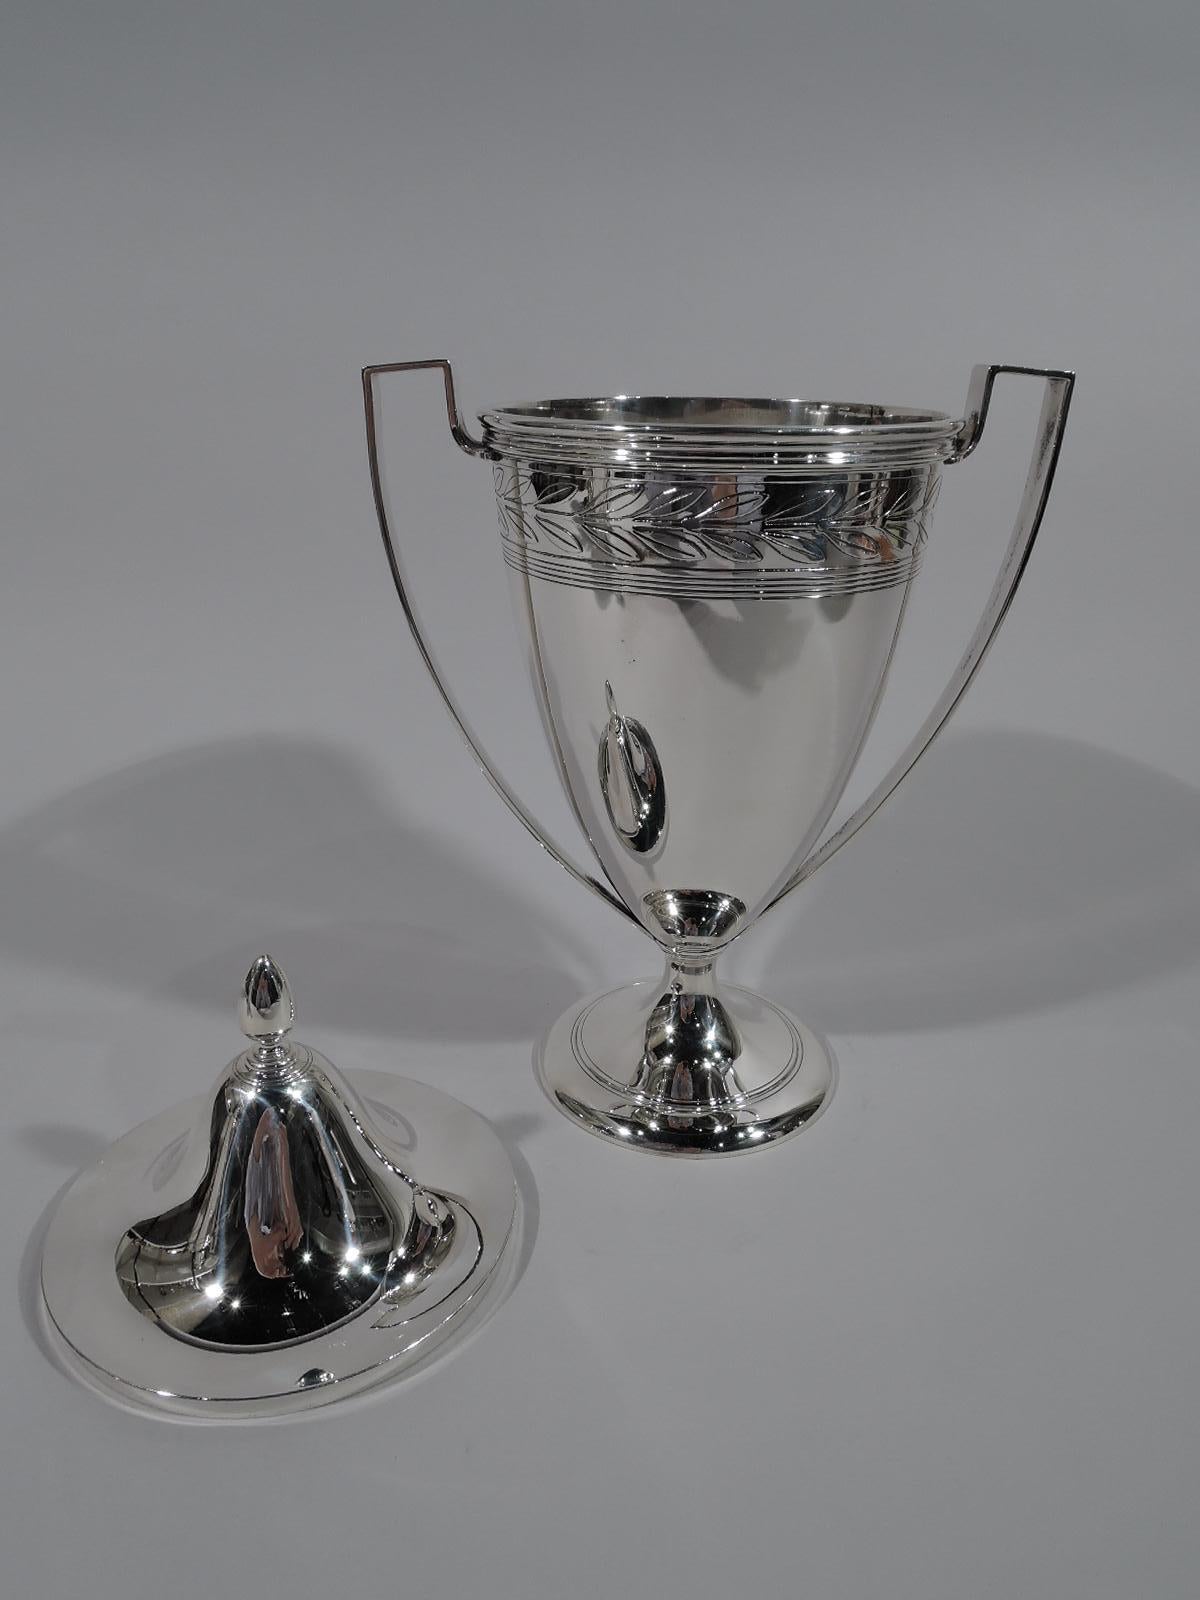 Art Deco sterling silver trophy cup. Made by Tiffany & Co. in New York, ca 1913. Ovoid with high-looping scroll bracket handles and raised foot. Cover domed with ovoid finial. Cup has acid-etched stylized laurel-wreath border at rim. Below there’s